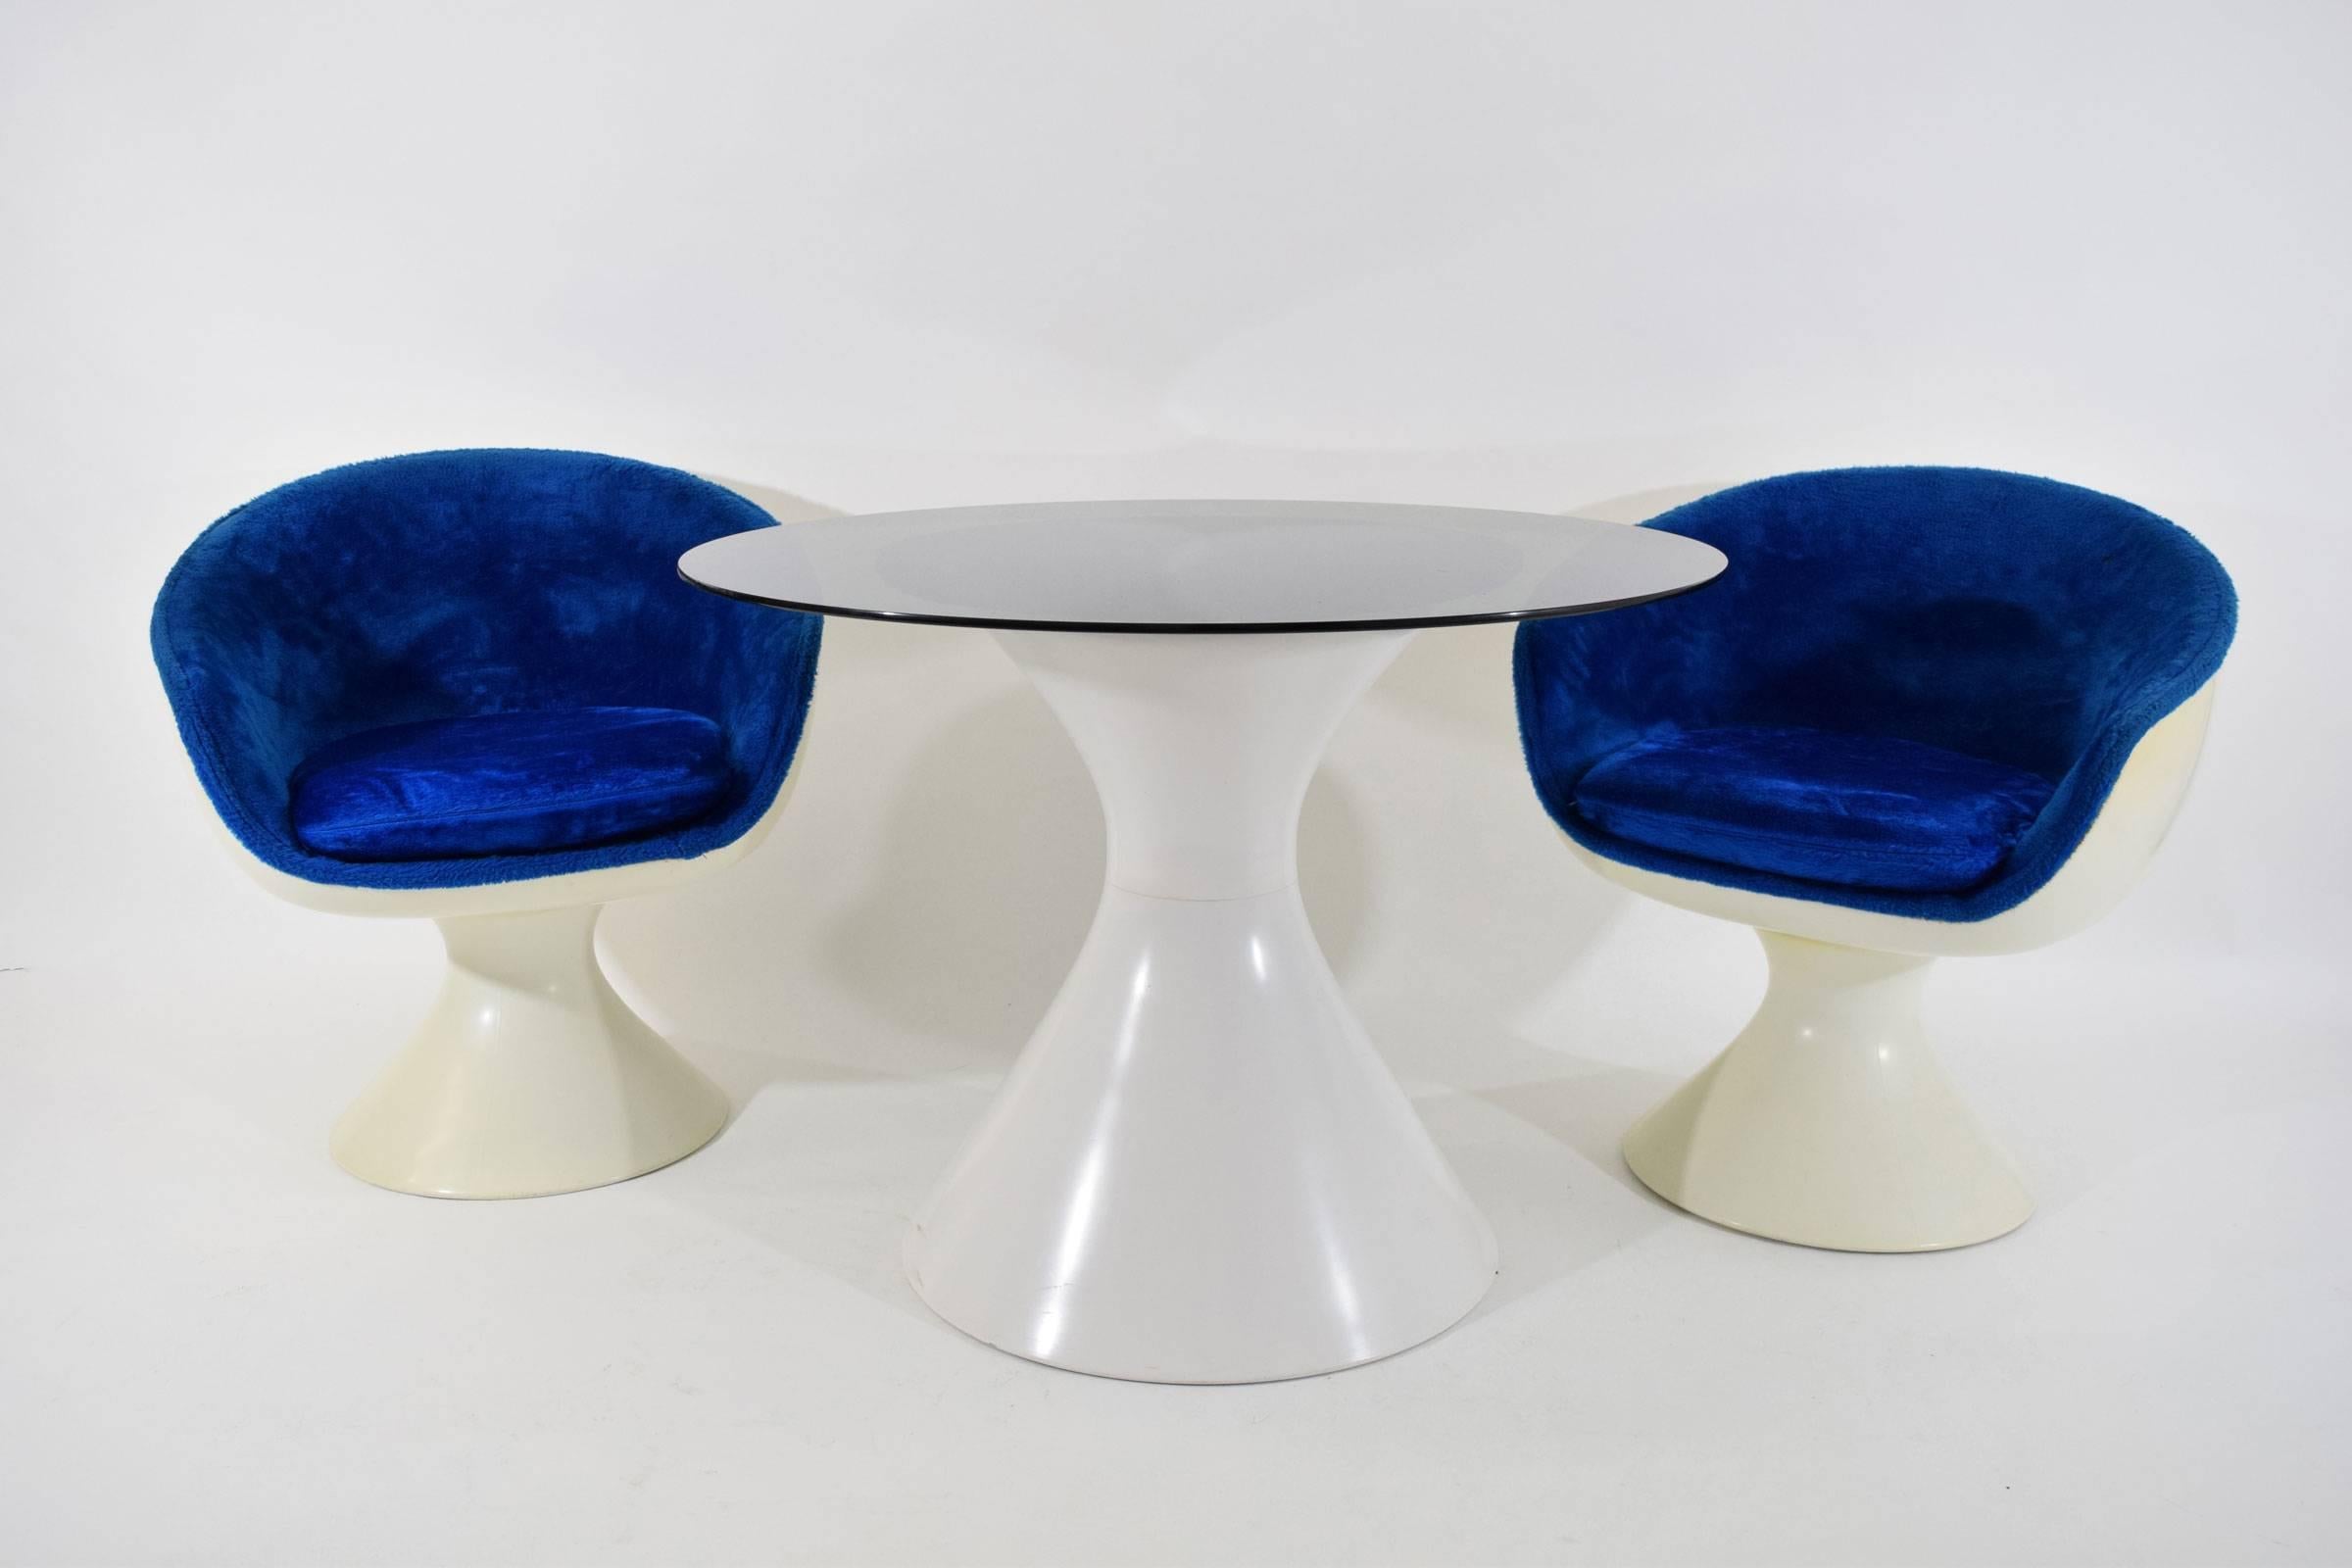 Fiberglass table with glass top. Size of top can be adjusted. We have a set of four chairs that go with this table.